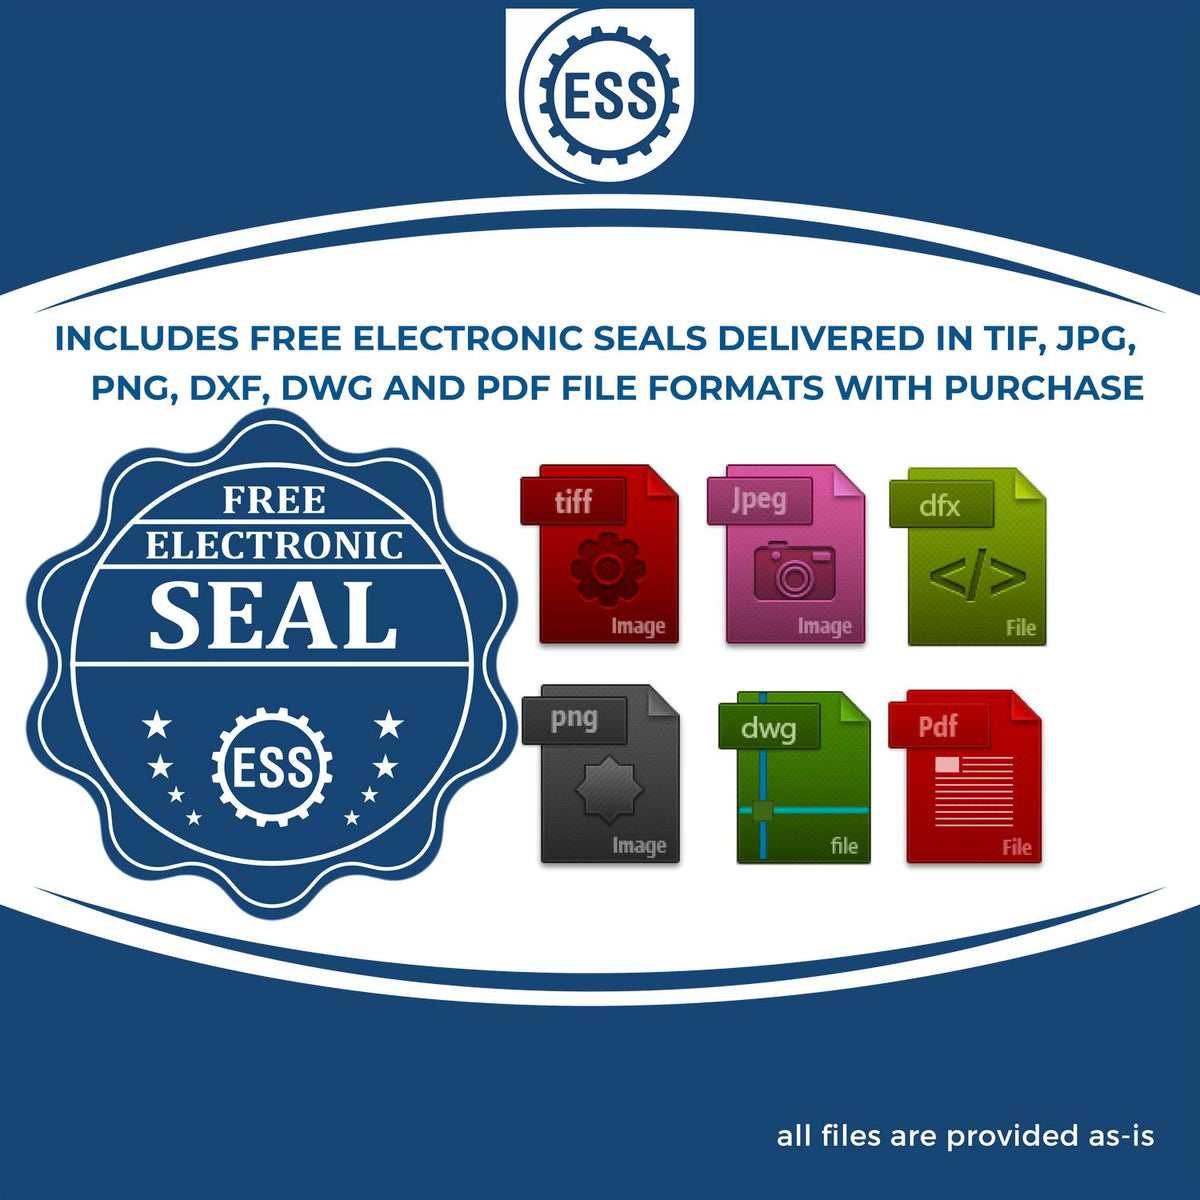 An infographic for the free electronic seal for the State of Arizona Long Reach Architectural Embossing Seal illustrating the different file type icons such as DXF, DWG, TIF, JPG and PNG.